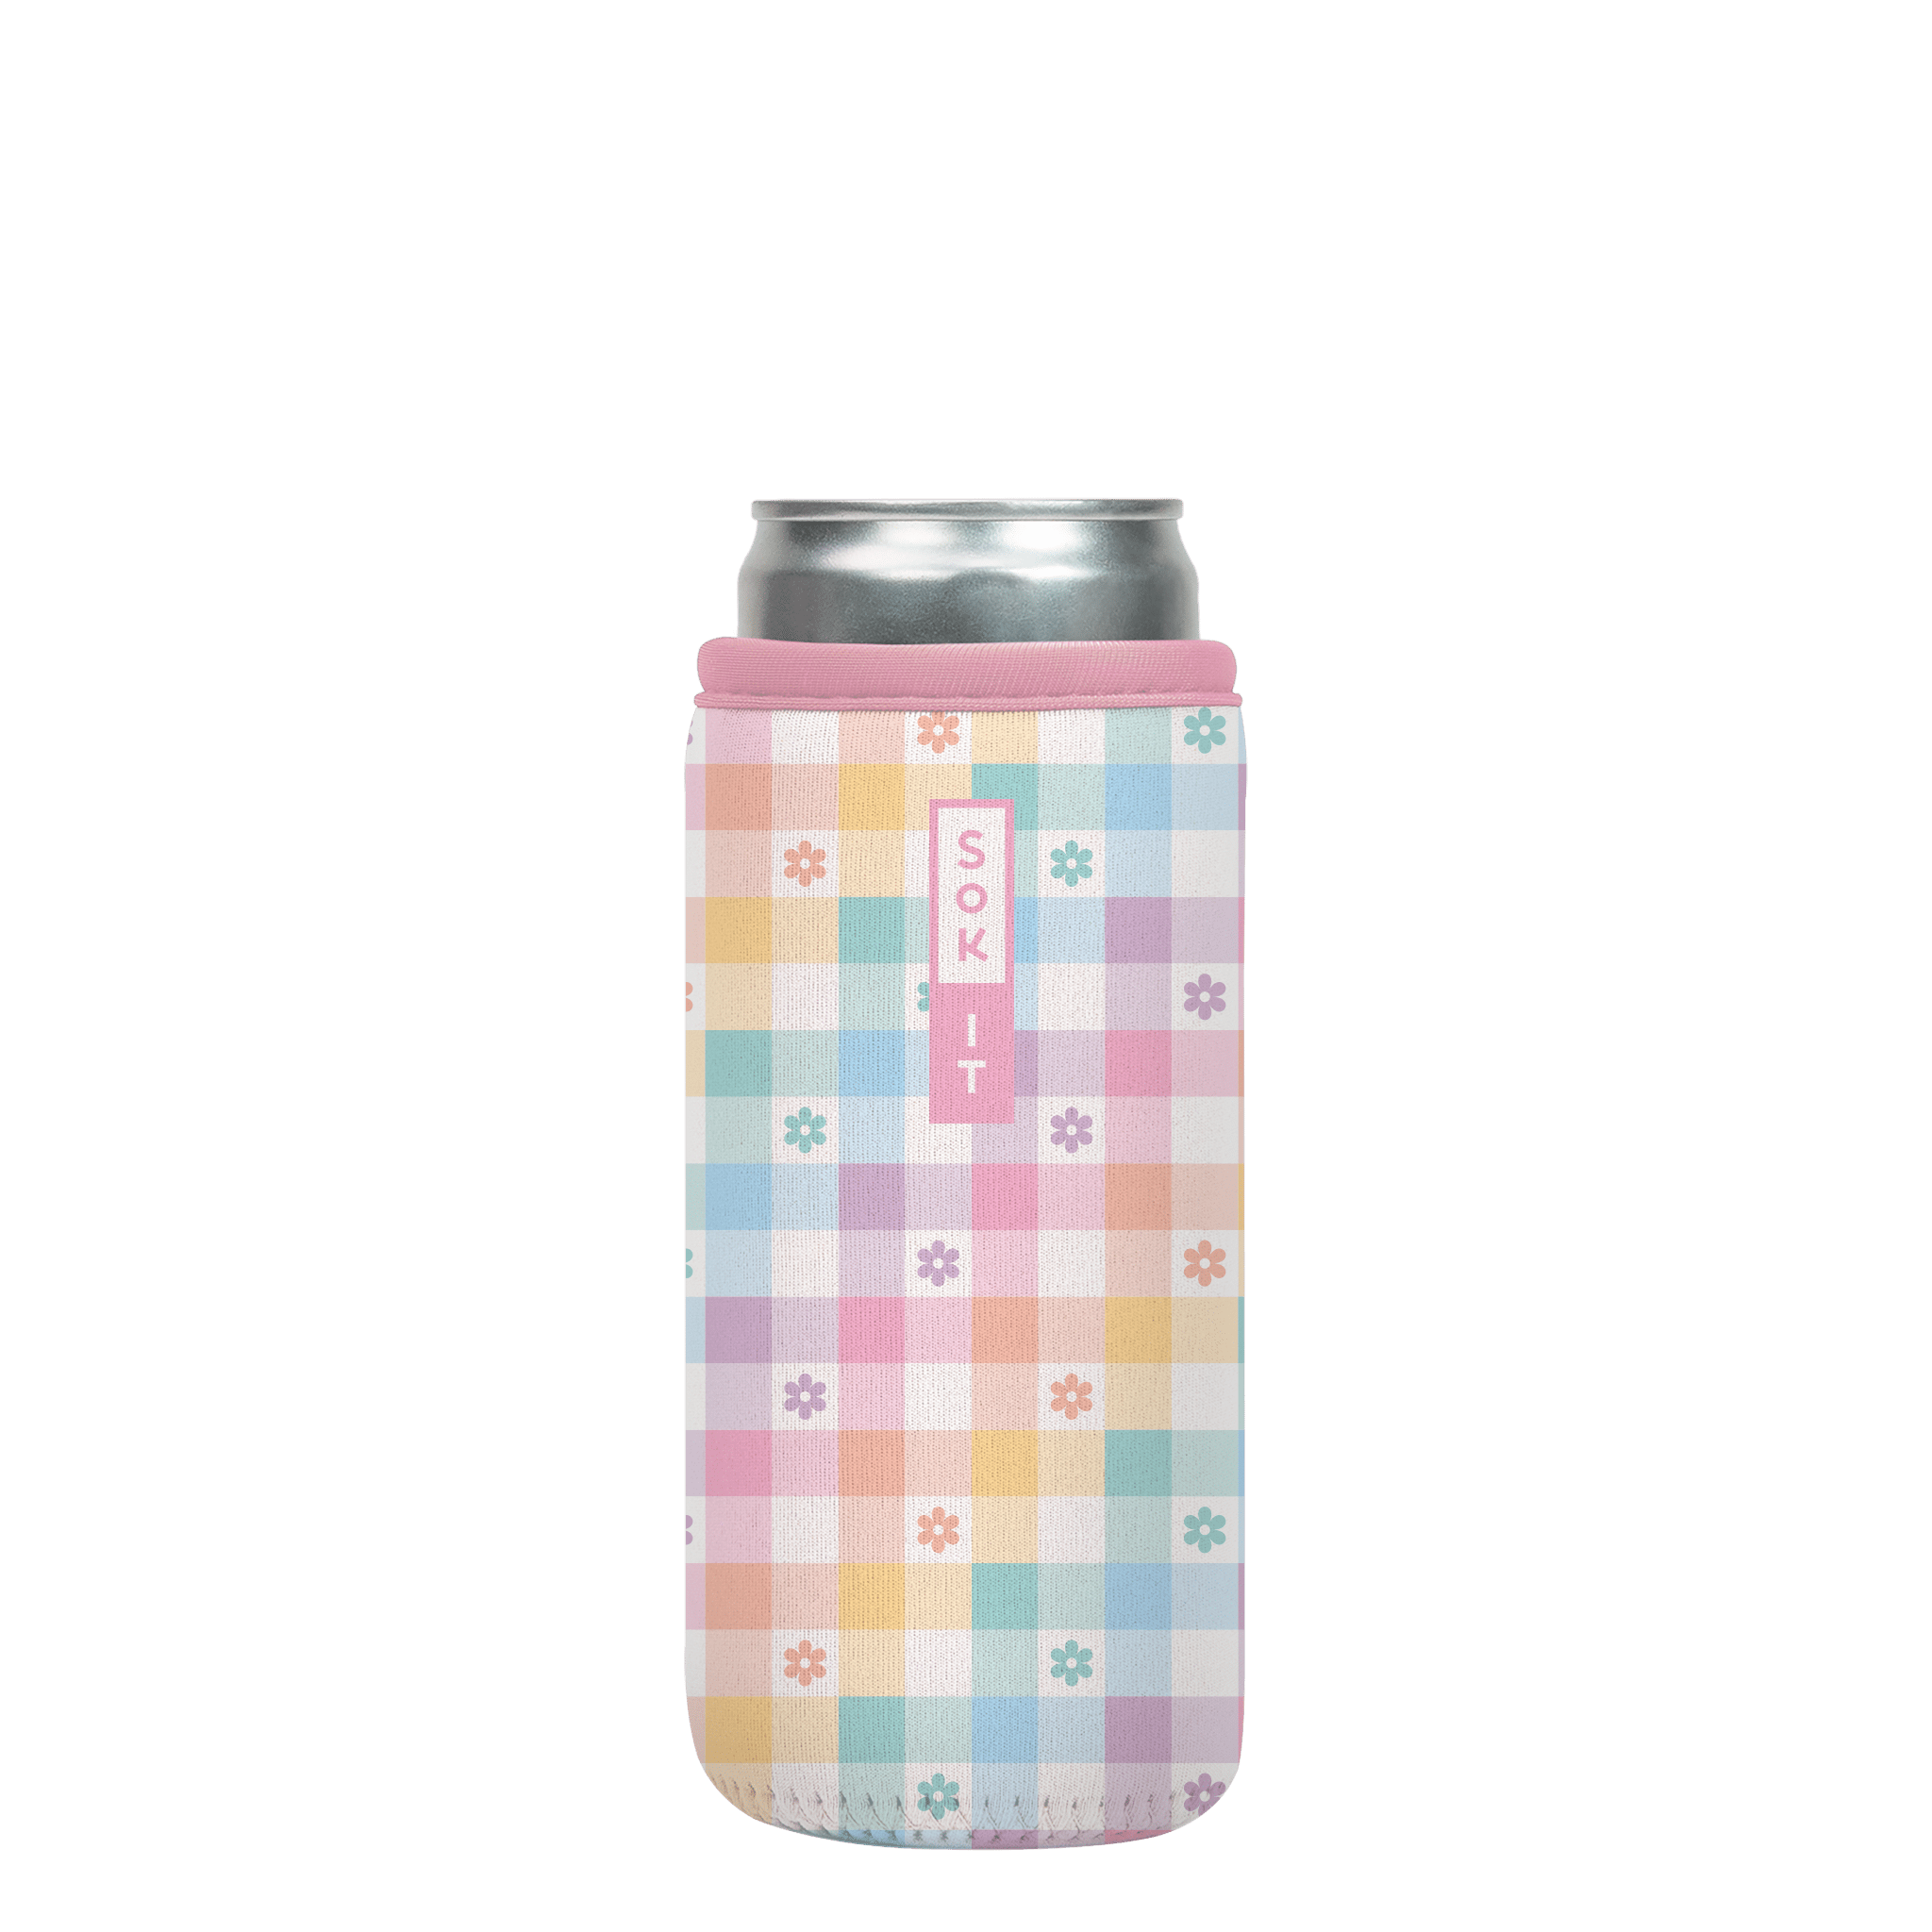 CanSok-Floral Gingham Flowers 12oz Slim Can